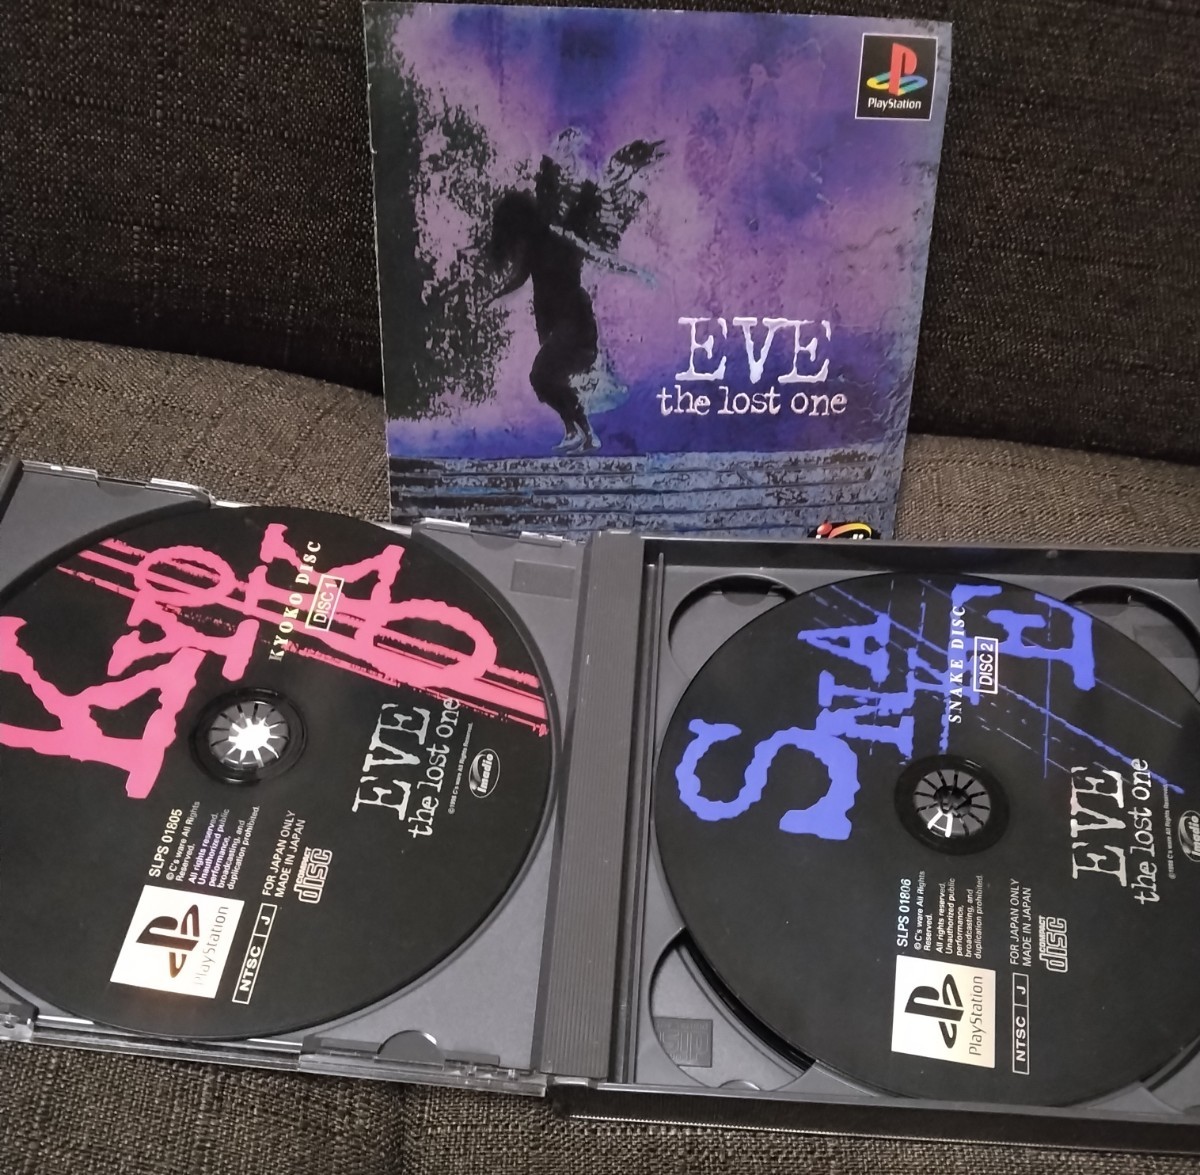 PS　イヴ・ザ・ロストワン　EVE the lost one PlayStation_画像2